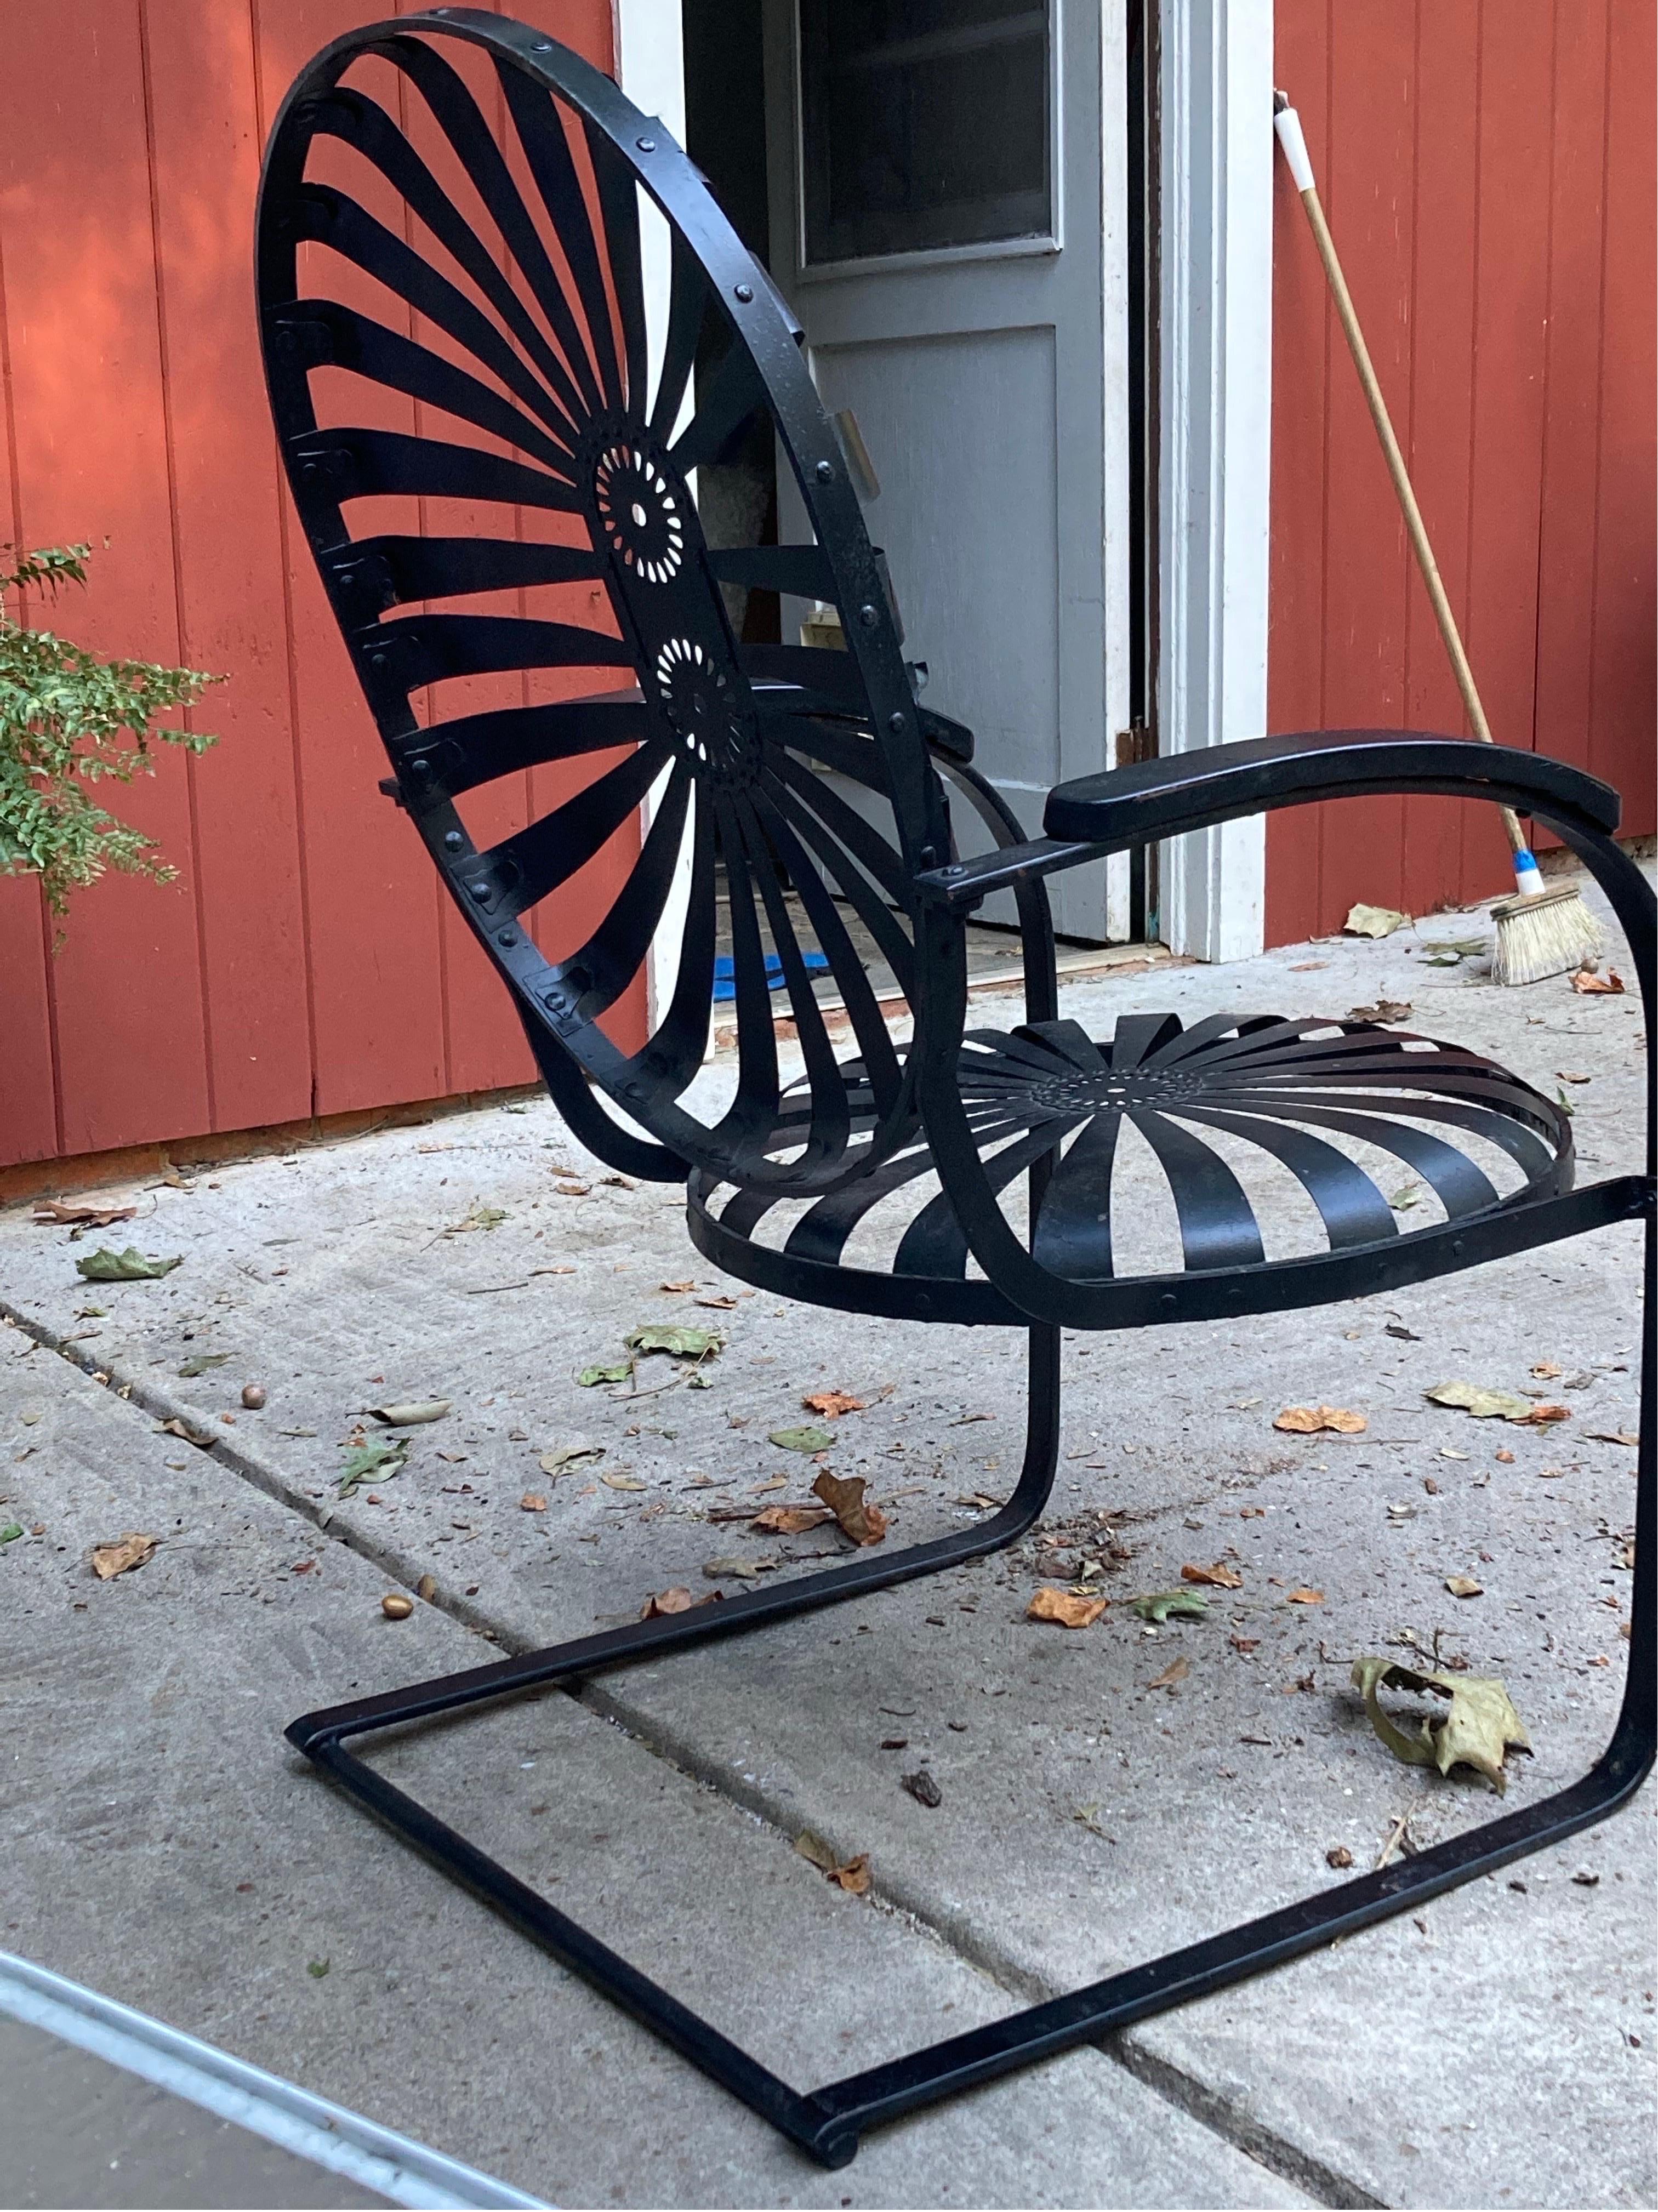 larger cantilever rocking chair for porch and patio, can handle the heat and the humidity, very comfortable deep seated and sturdy, made with antique iron and spring steel, circa 1940 in satin black. shipping from athens, ga
2 available. 
no maker’s